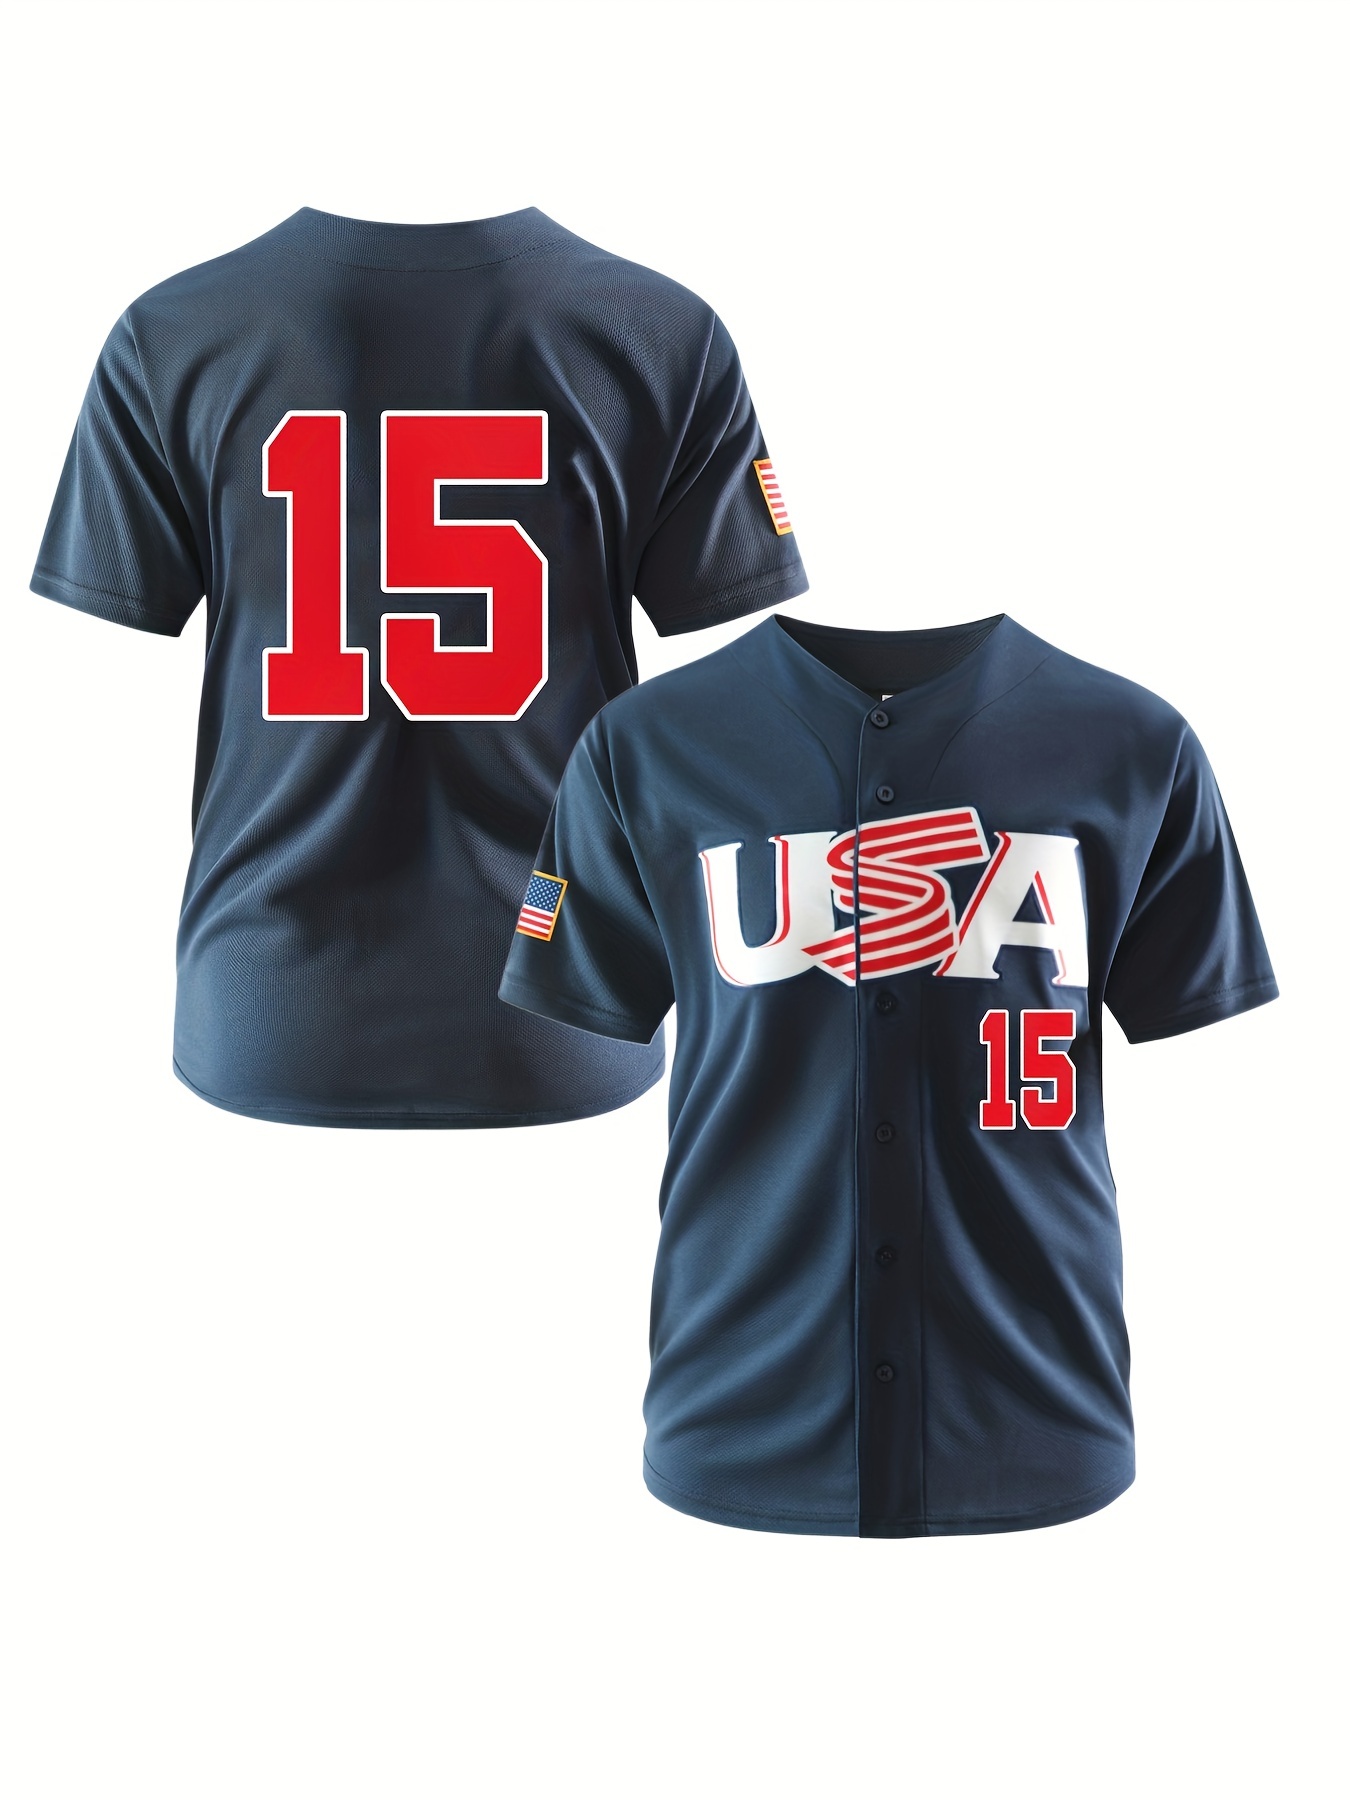 Men's #15 Usa Baseball Jersey, Retro Classic Baseball Shirt, Breathable  Embroidery Button Up Sports Uniform For Party Festival Gifts - Temu